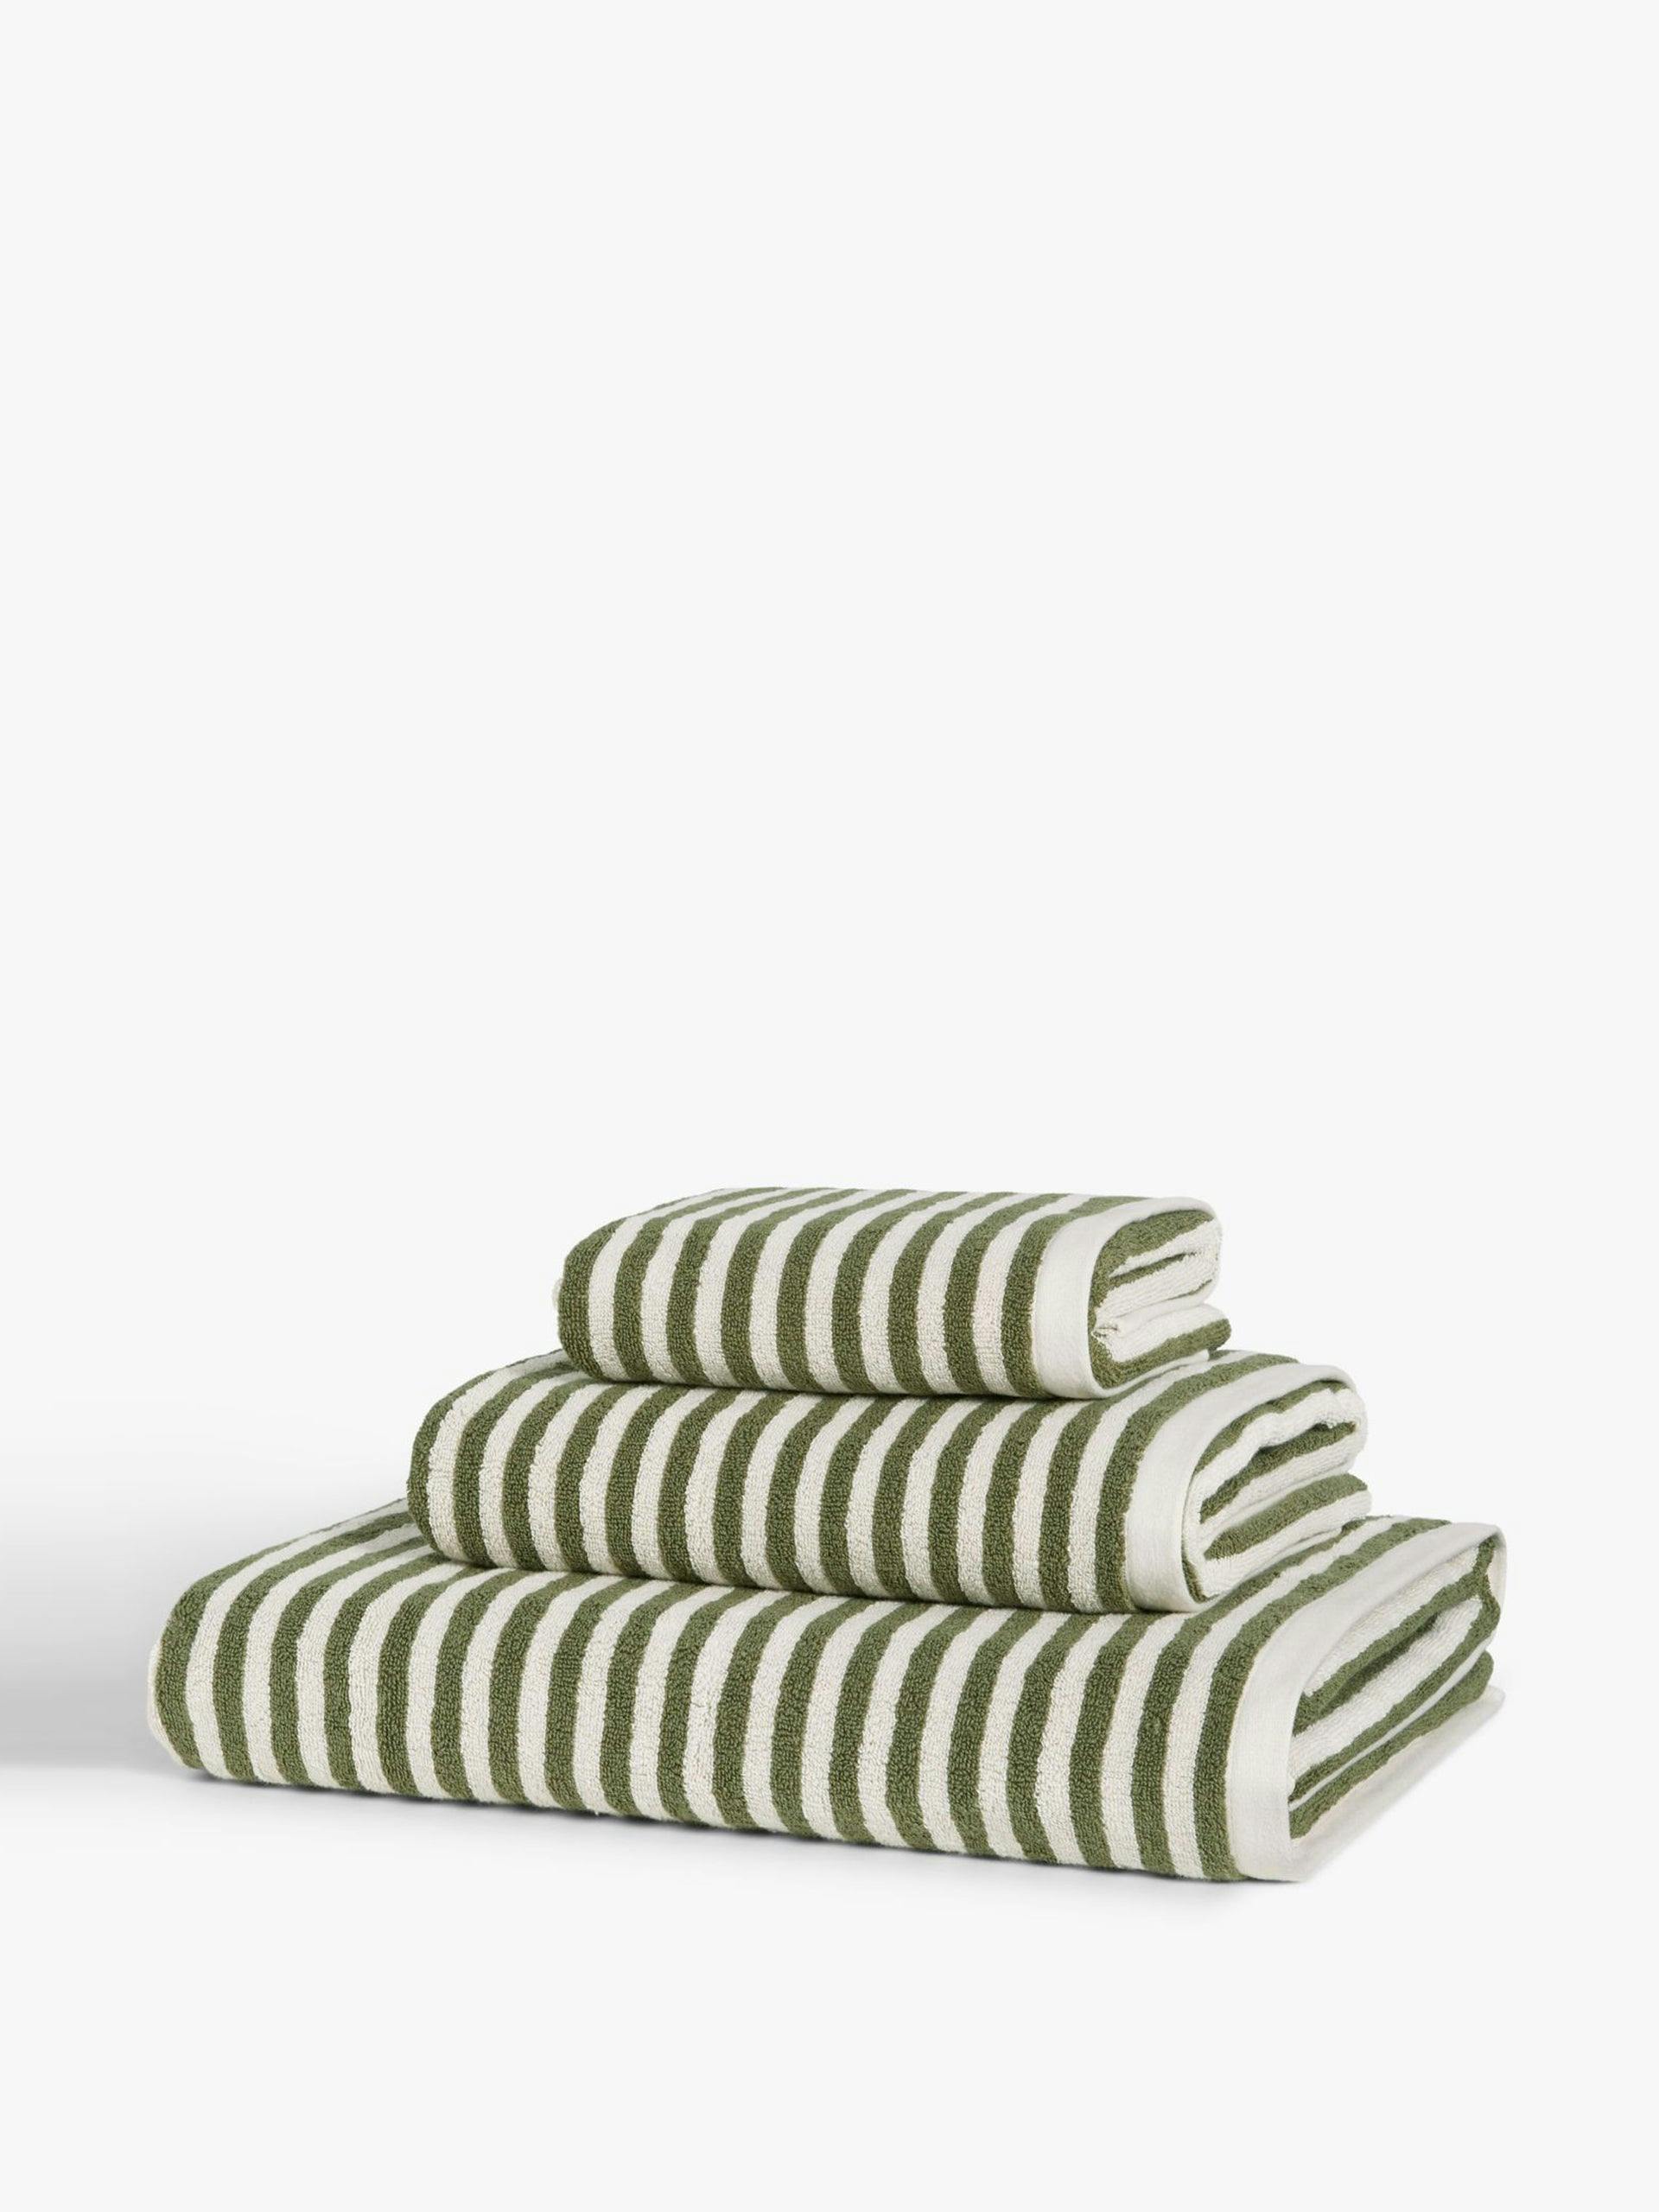 Green and white striped bath towel